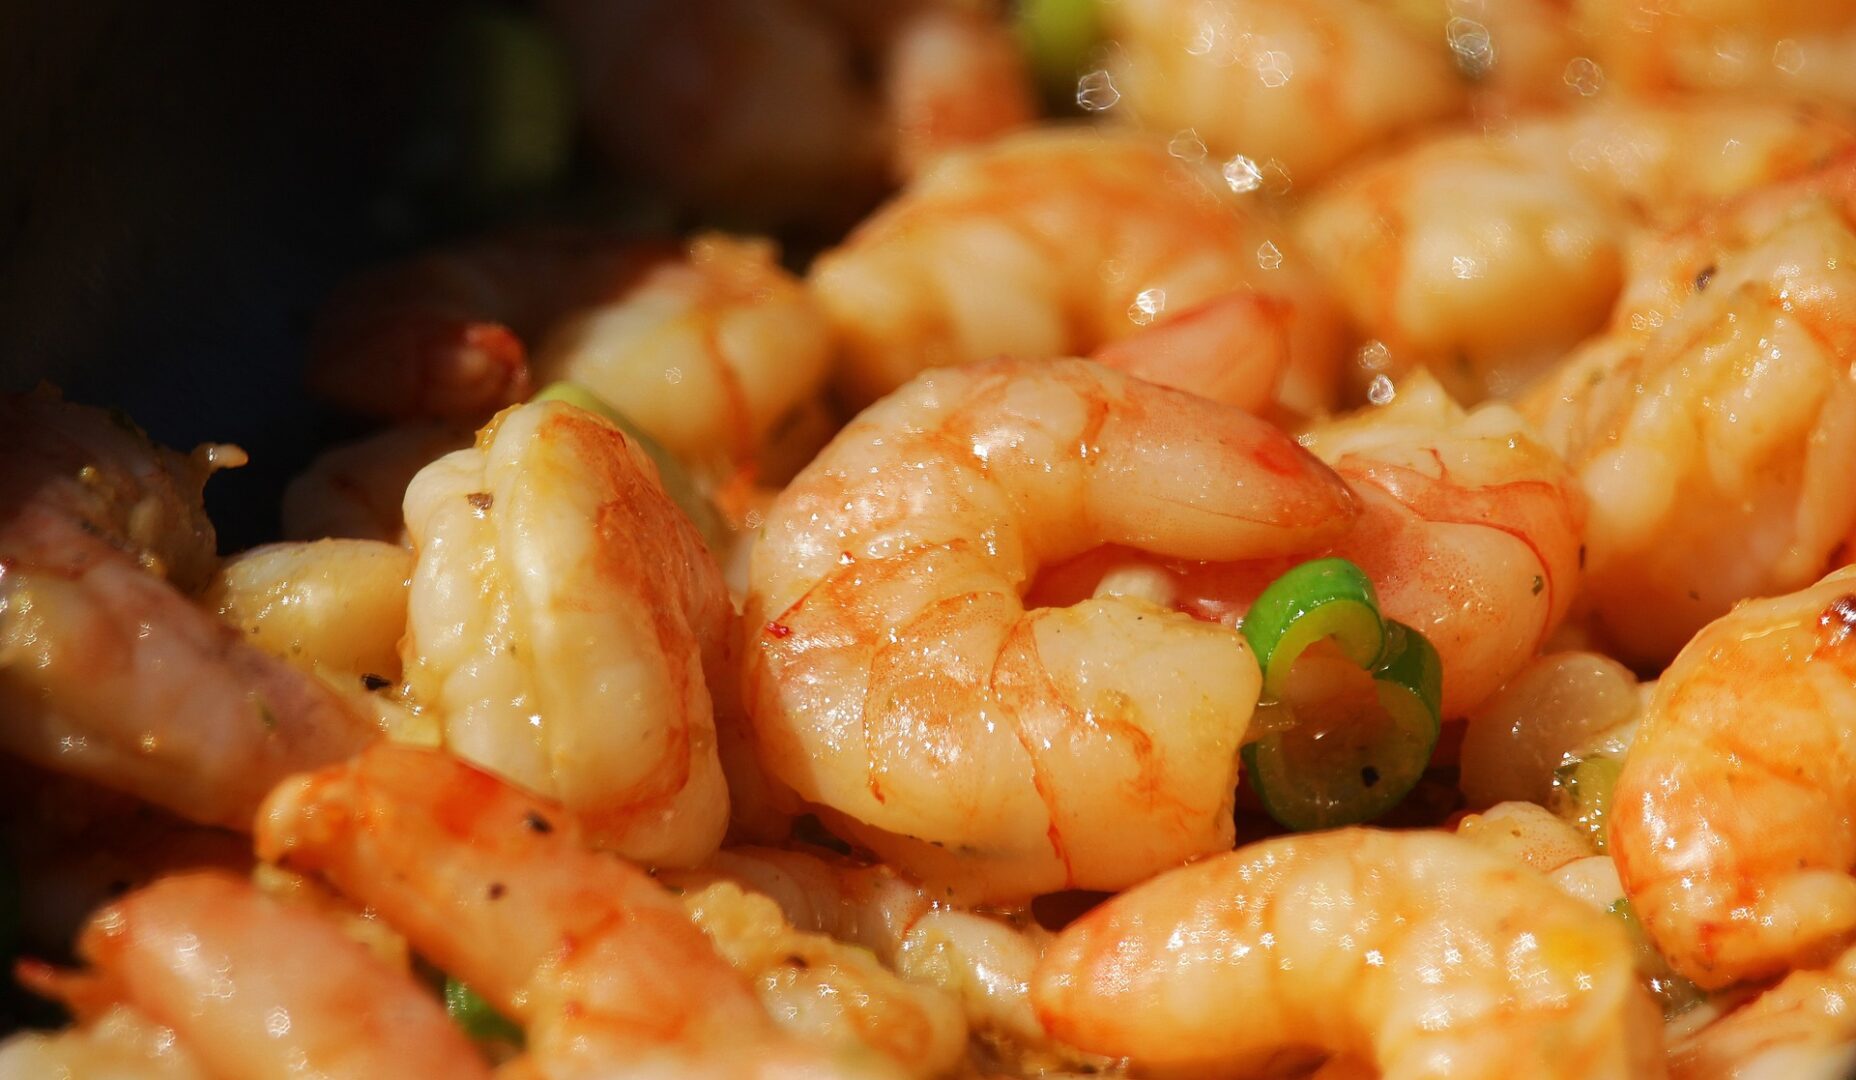 A close up of shrimp in sauce